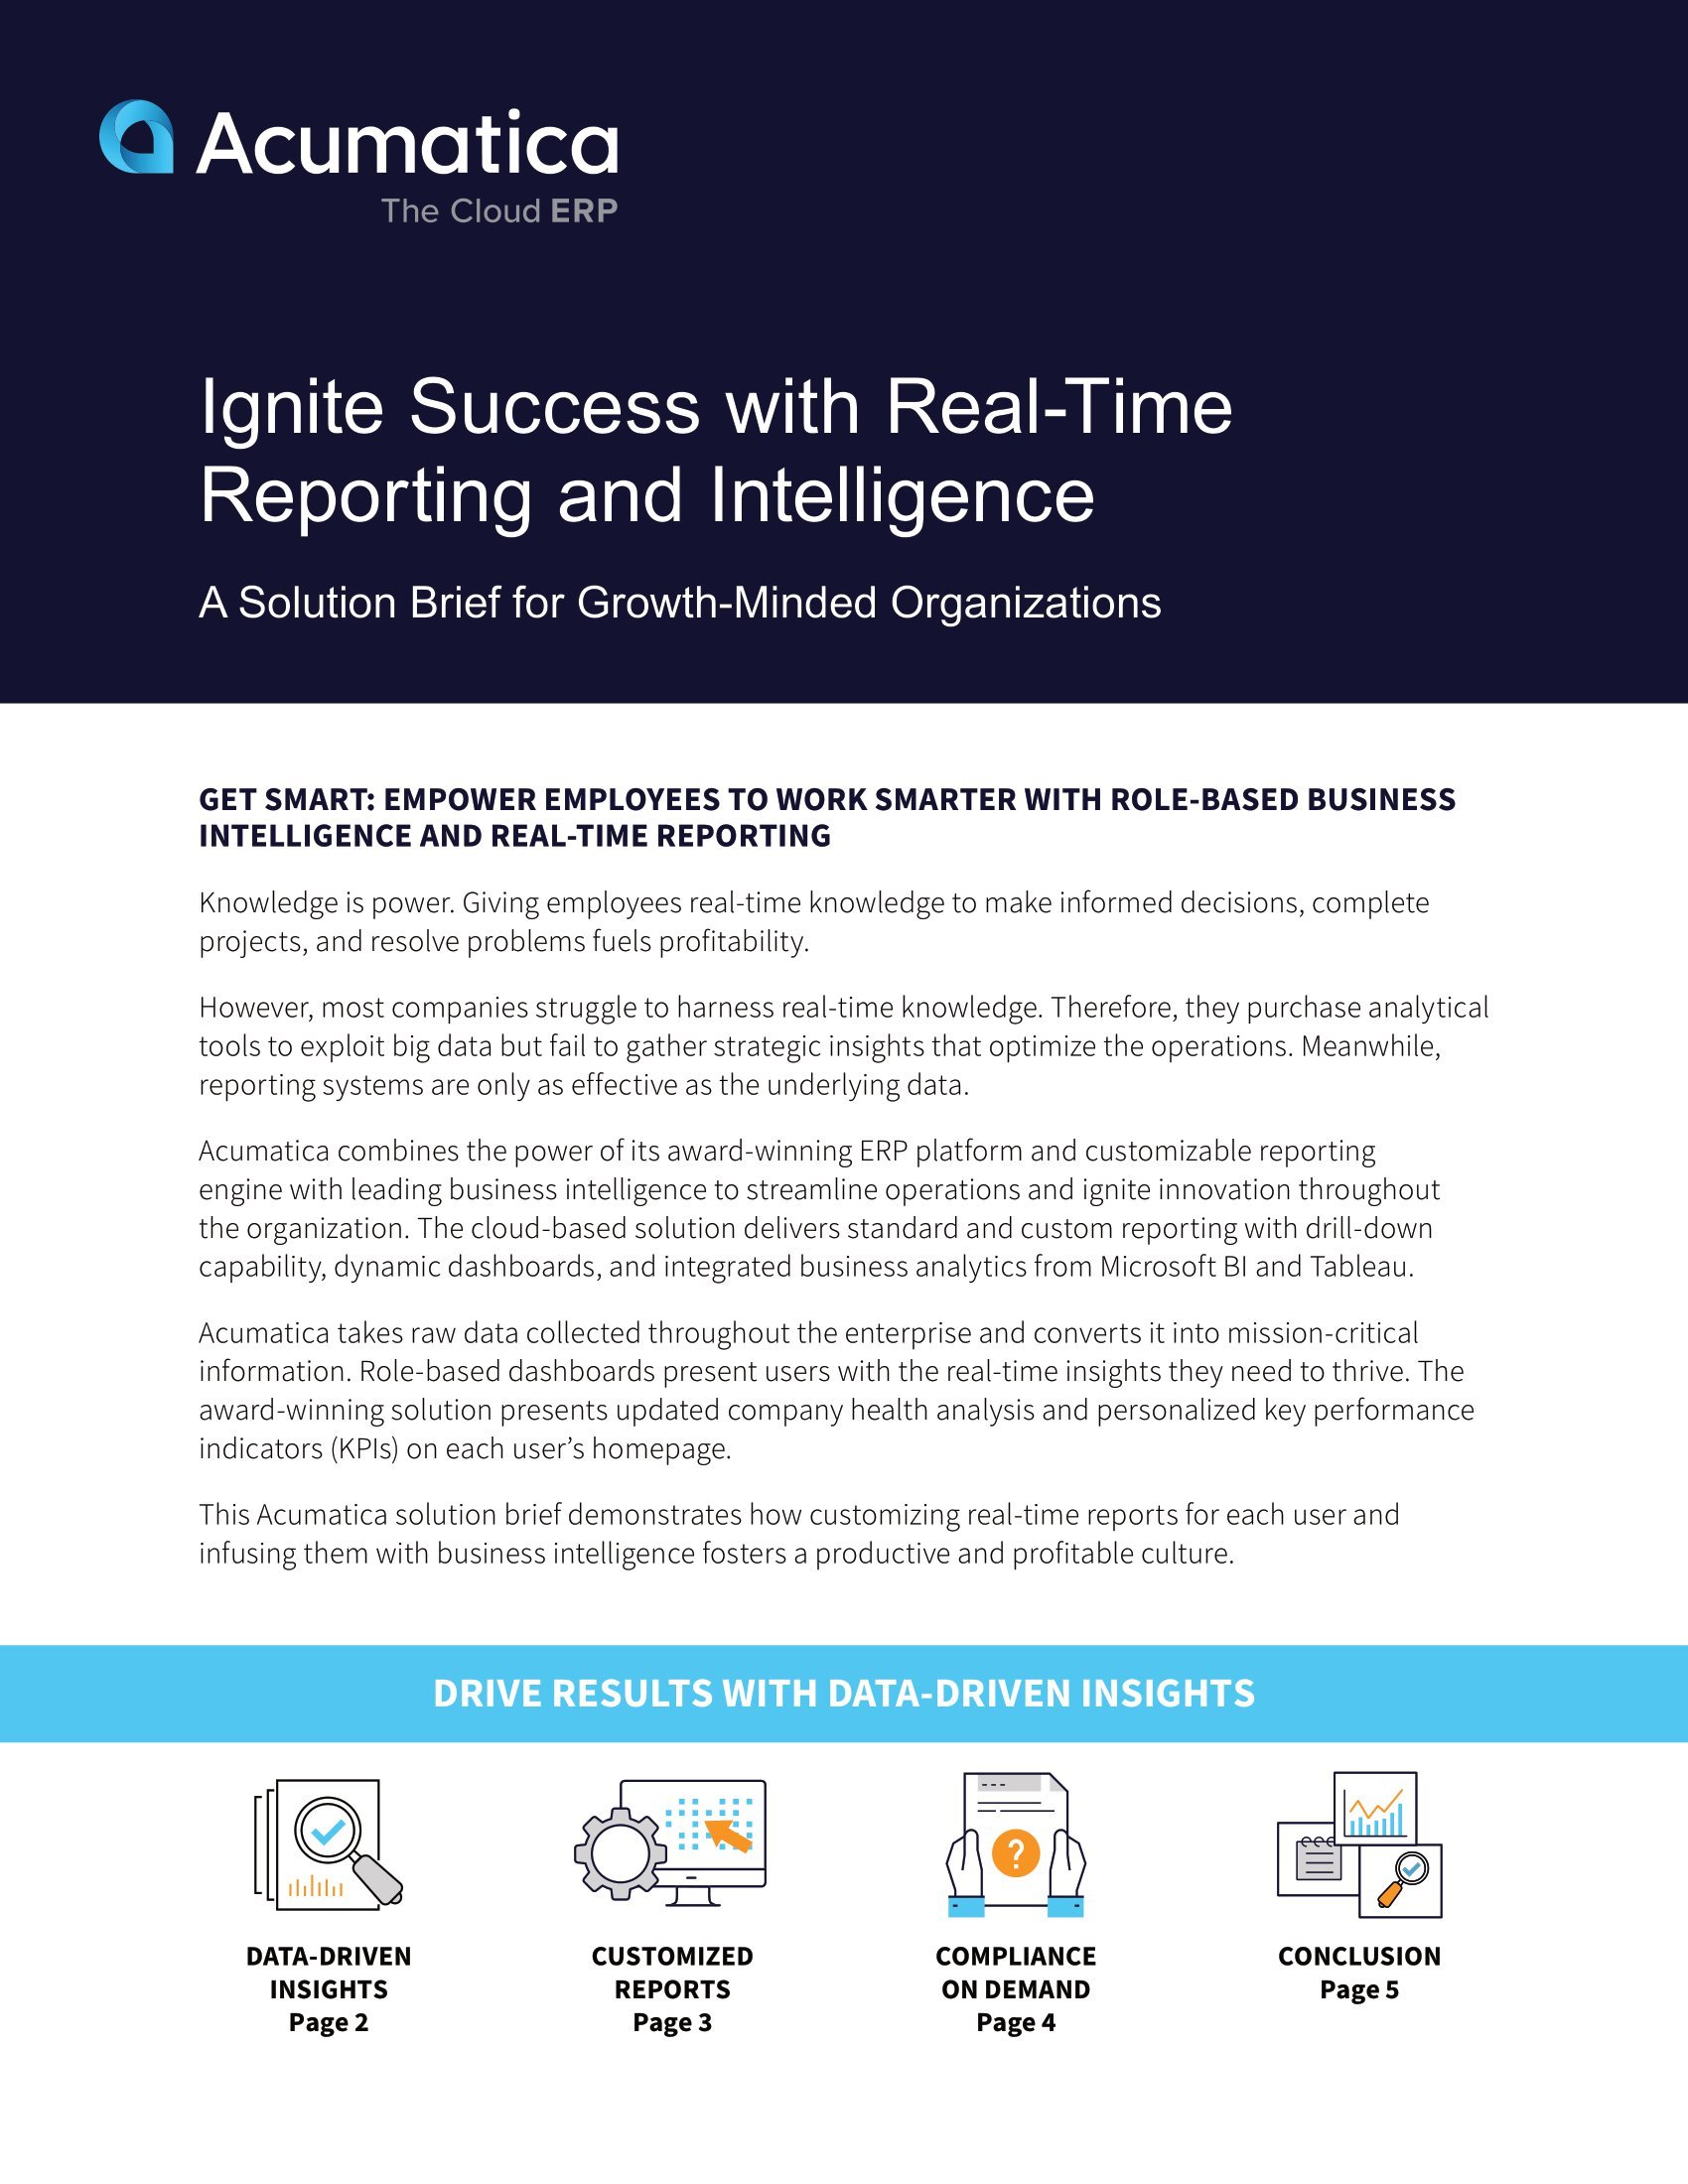 Ignite Success with Real-Time Reporting and Intelligence